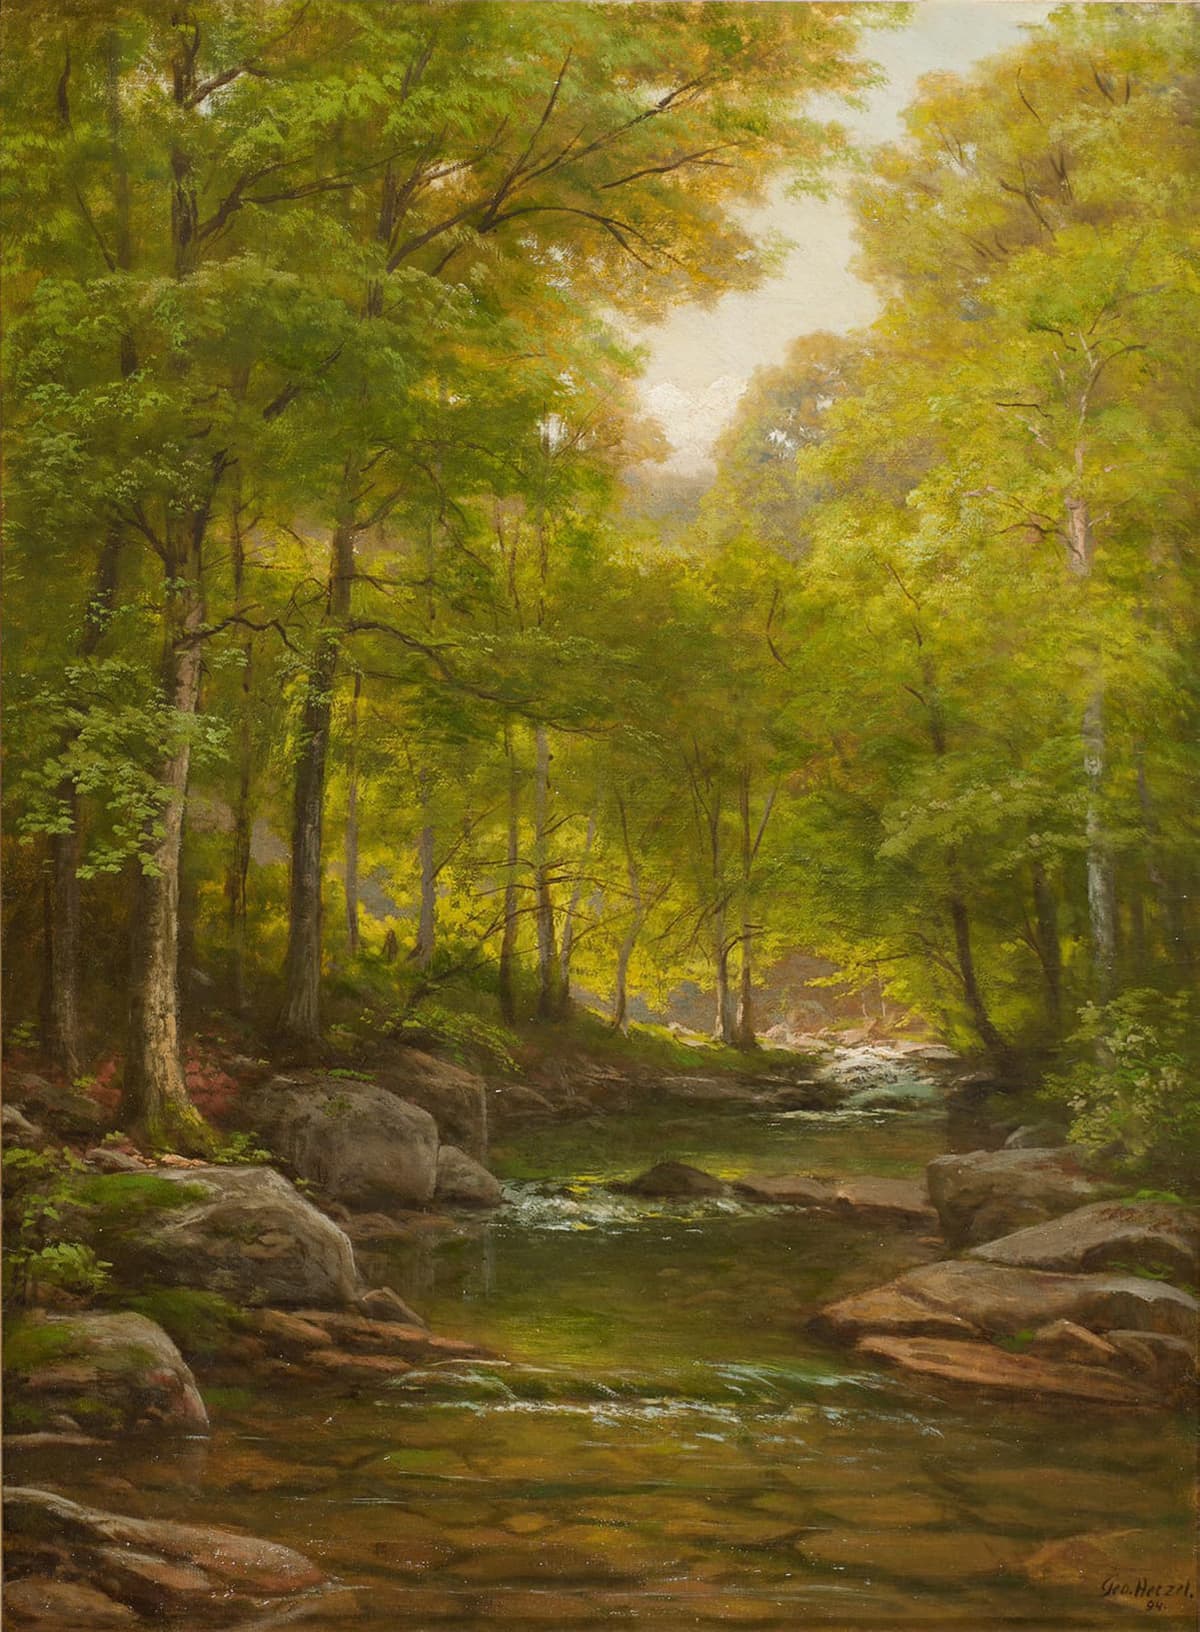 A painting depicts a brook with dense forest on either side